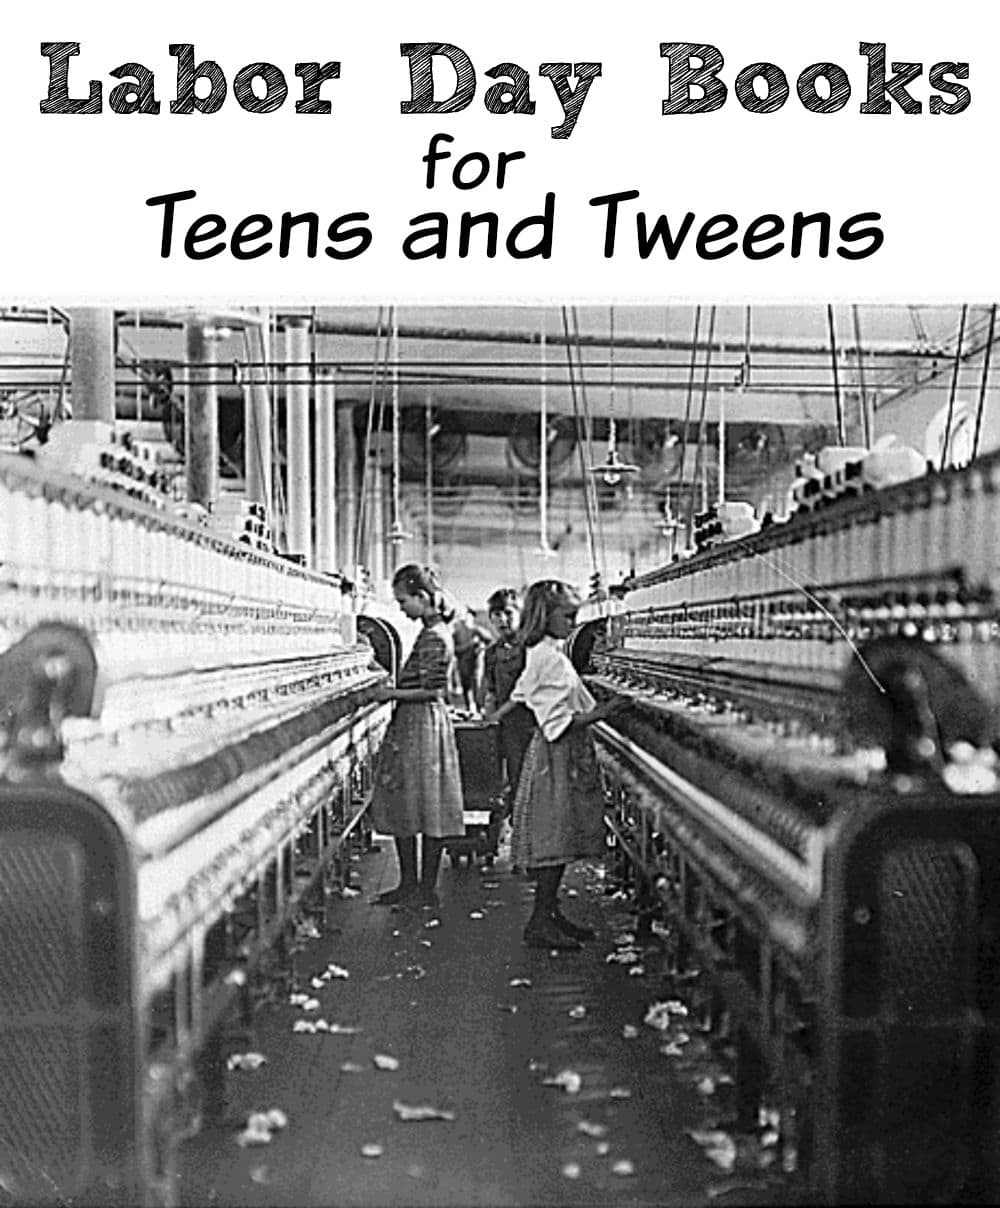 Labor Day Books for Teens and Tweens - Books to help kids learn about the labor movement and its place in U.S. history